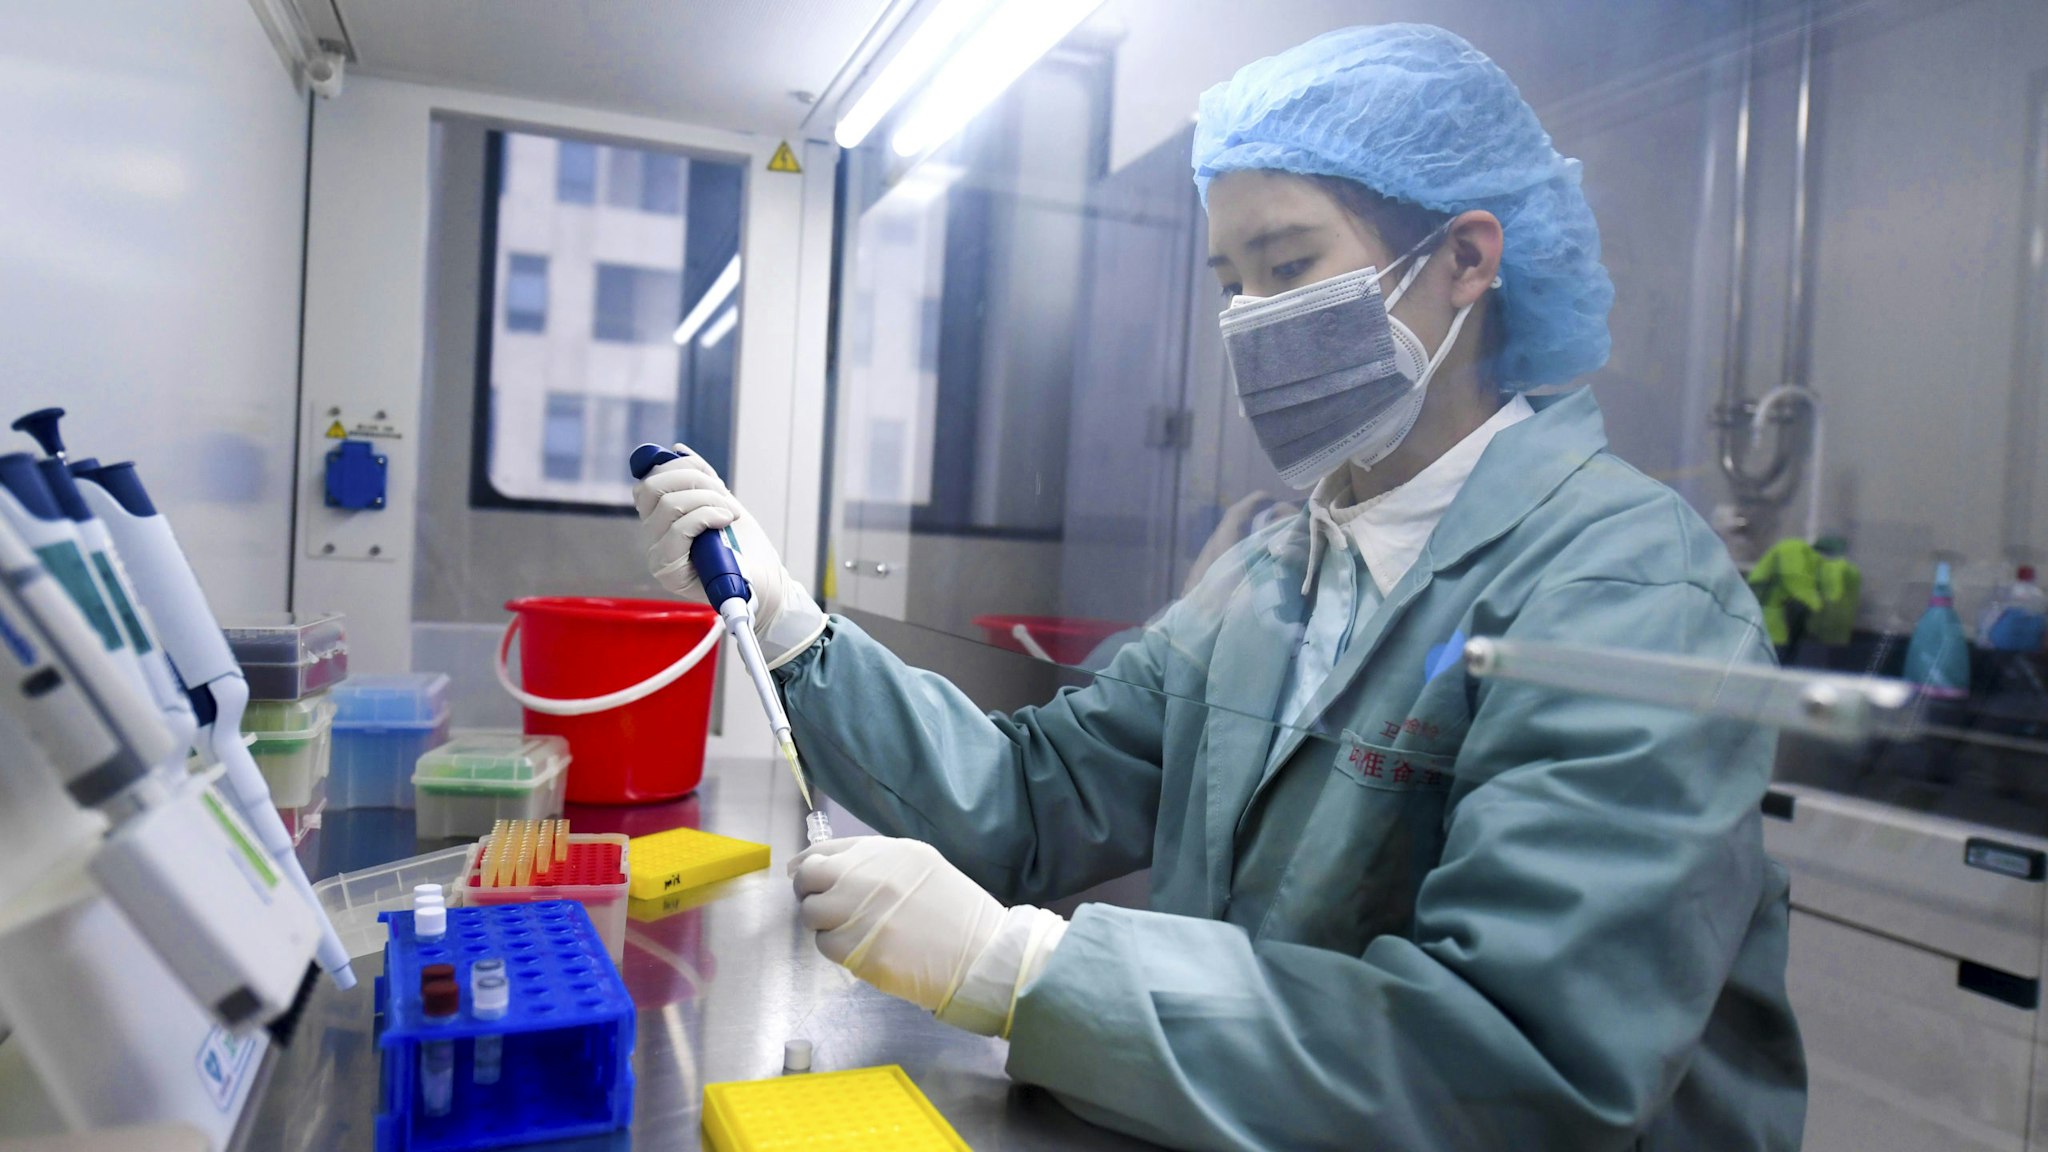 CHANGSHA, CHINA - MARCH 04: A medical worker prepares reagent during nucleic acid test at Weishi Medical Laboratory on March 4, 2020 in Changsha, Hunan Province of China.